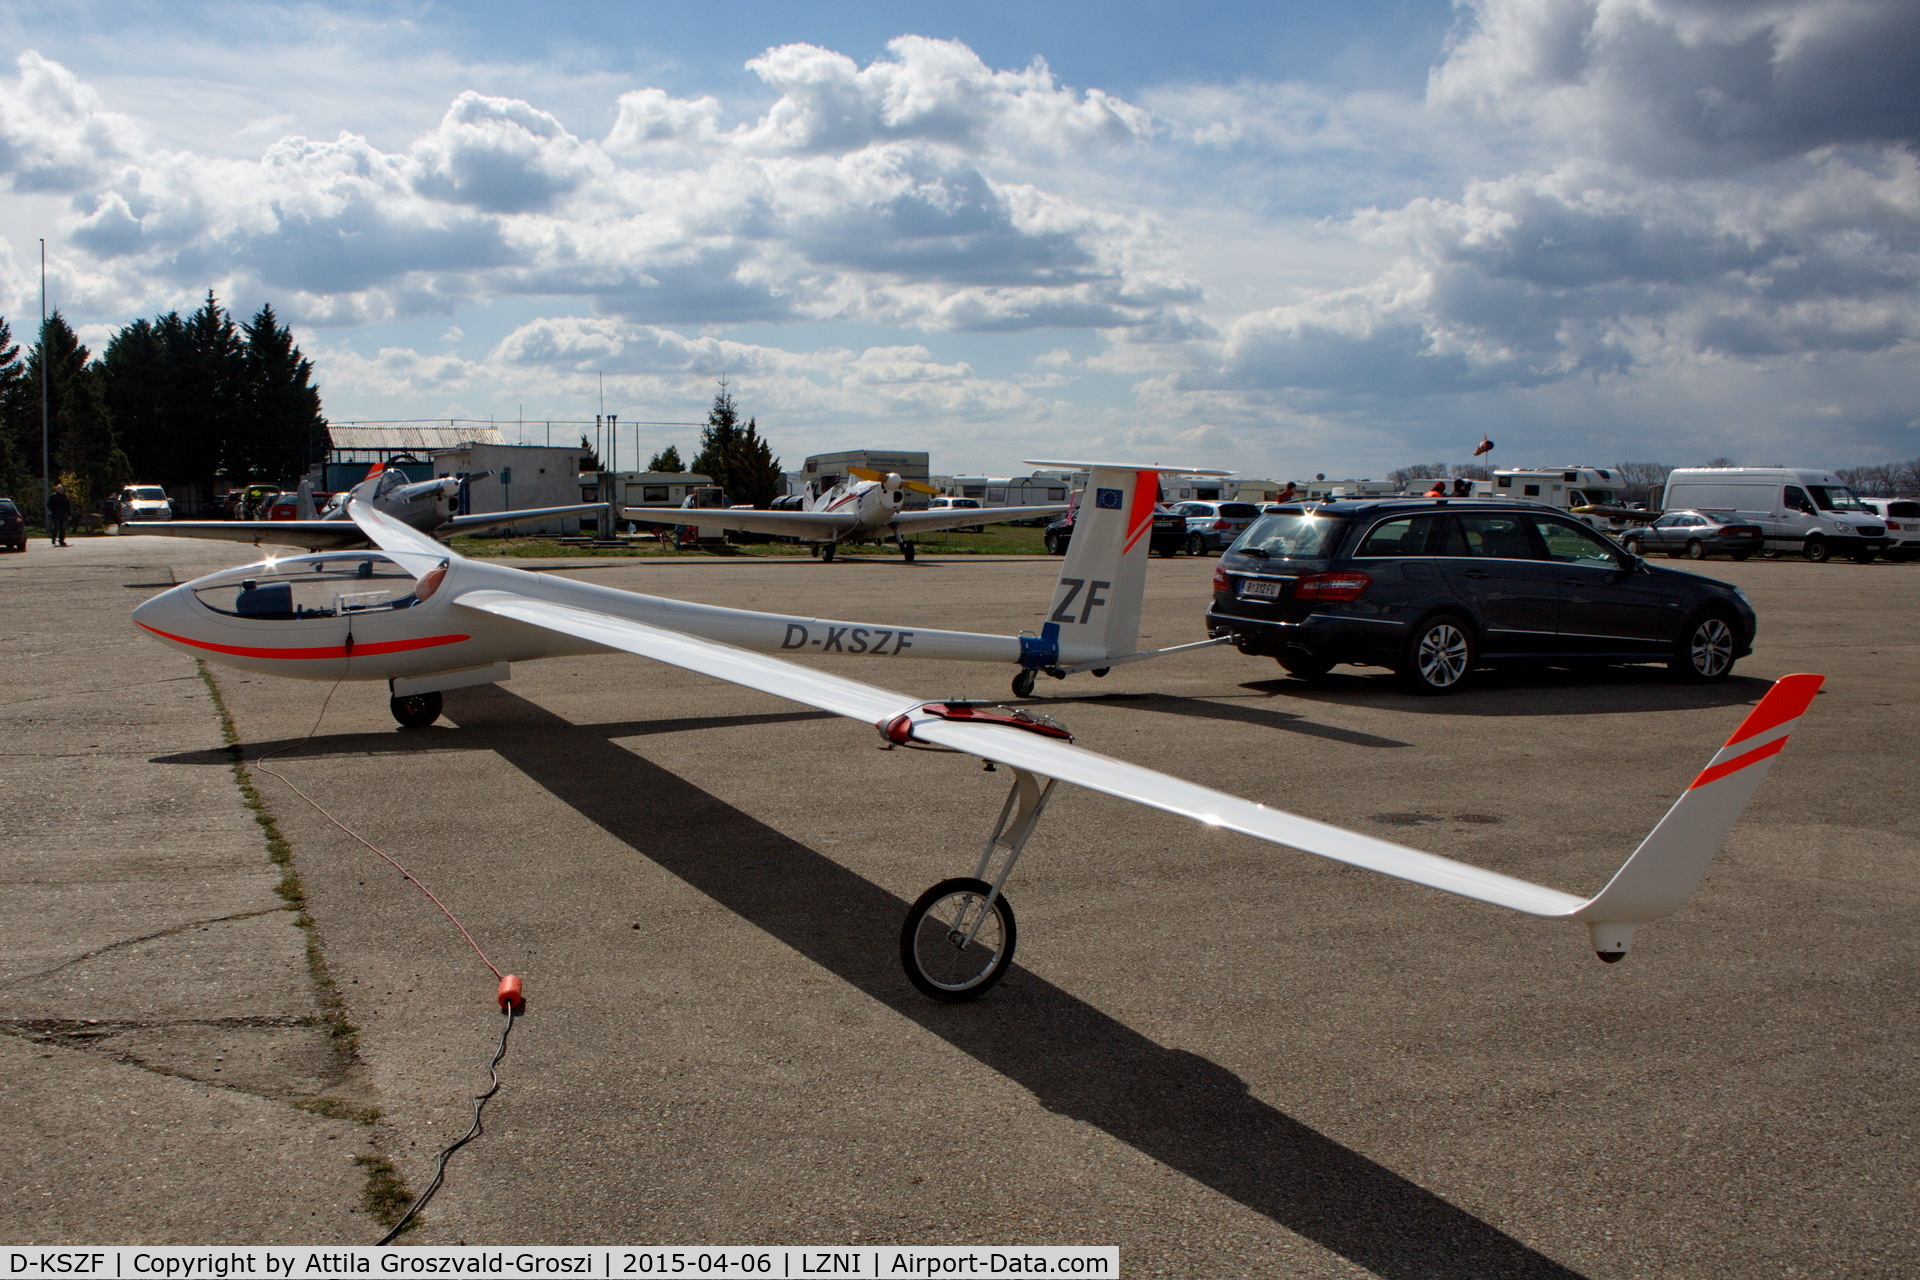 D-KSZF, 2003 Lange E-1 Antares 20E C/N Not found D-KSZF, Nitra Janikovce Airport - PRIBINA CUP 2015